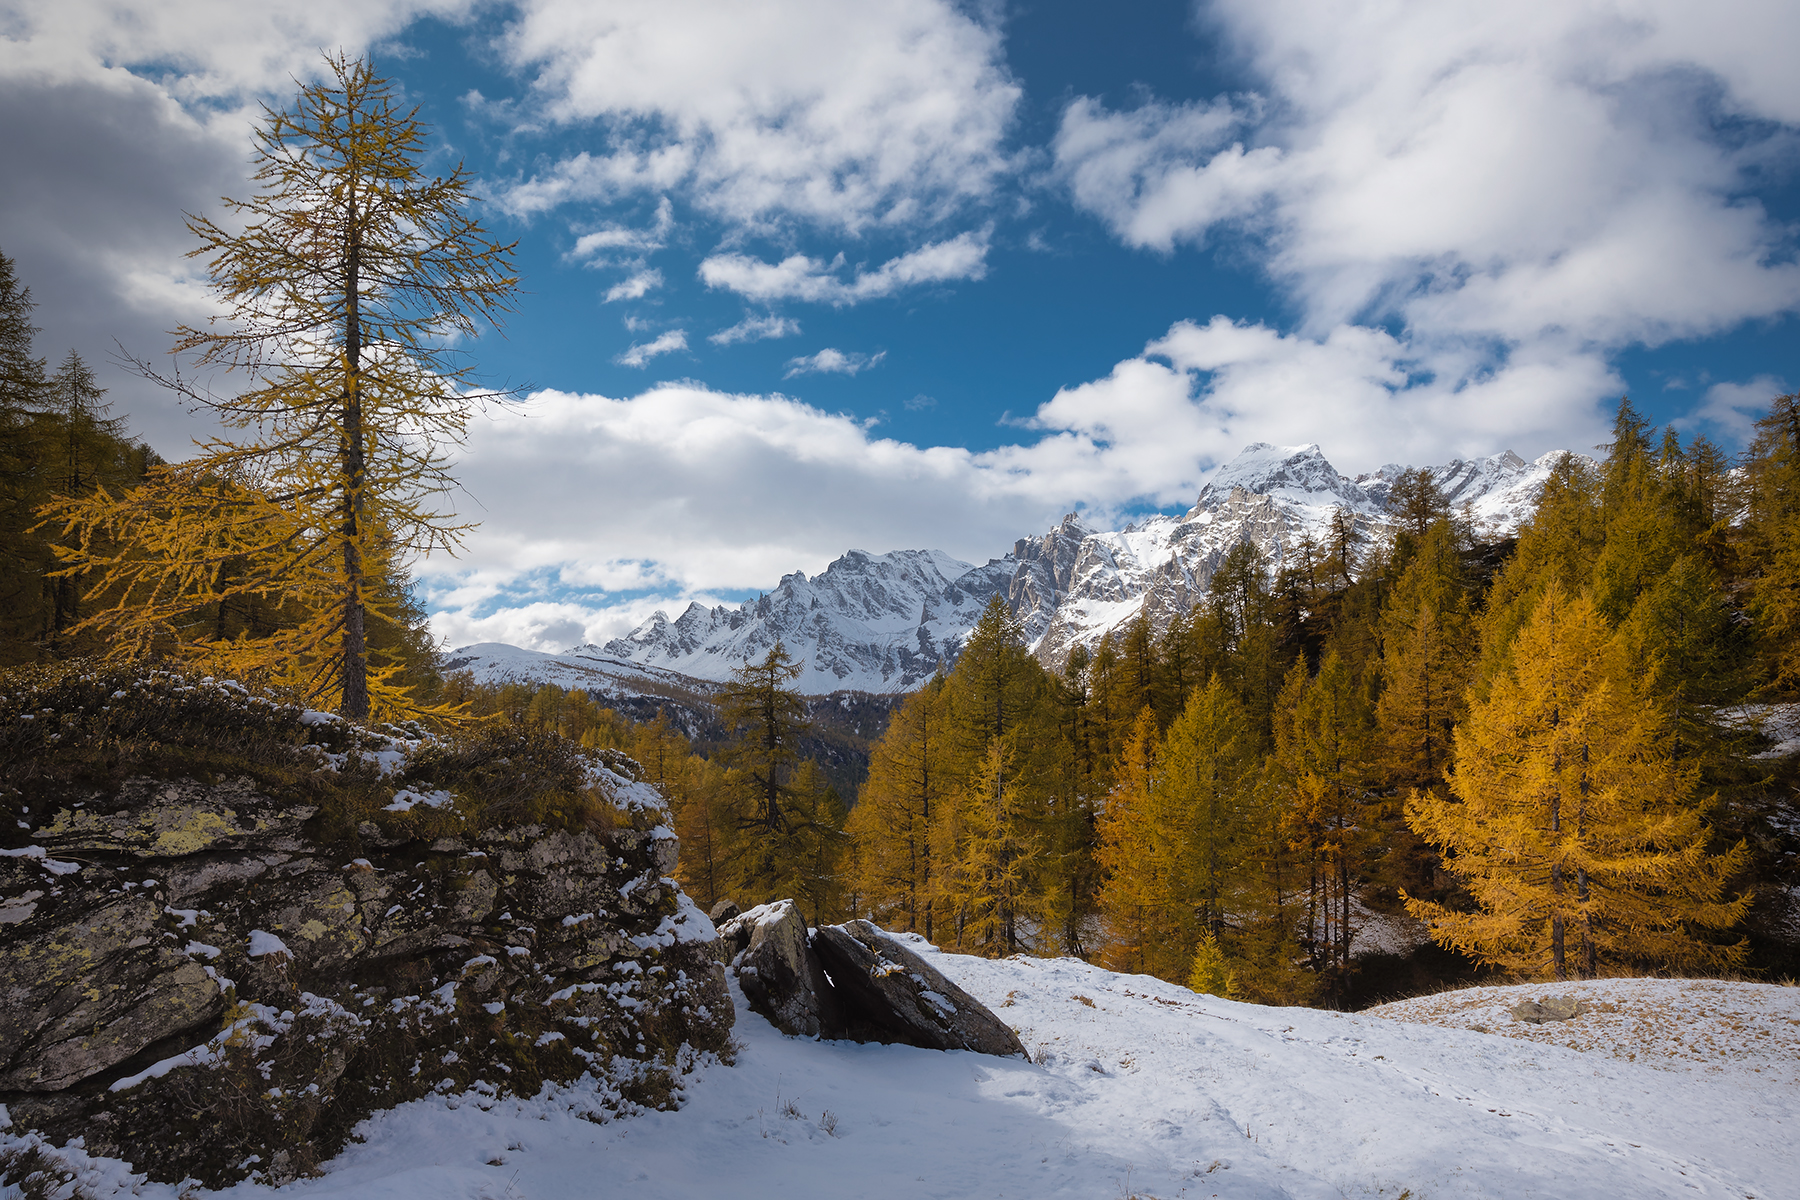 Walking among the larches...